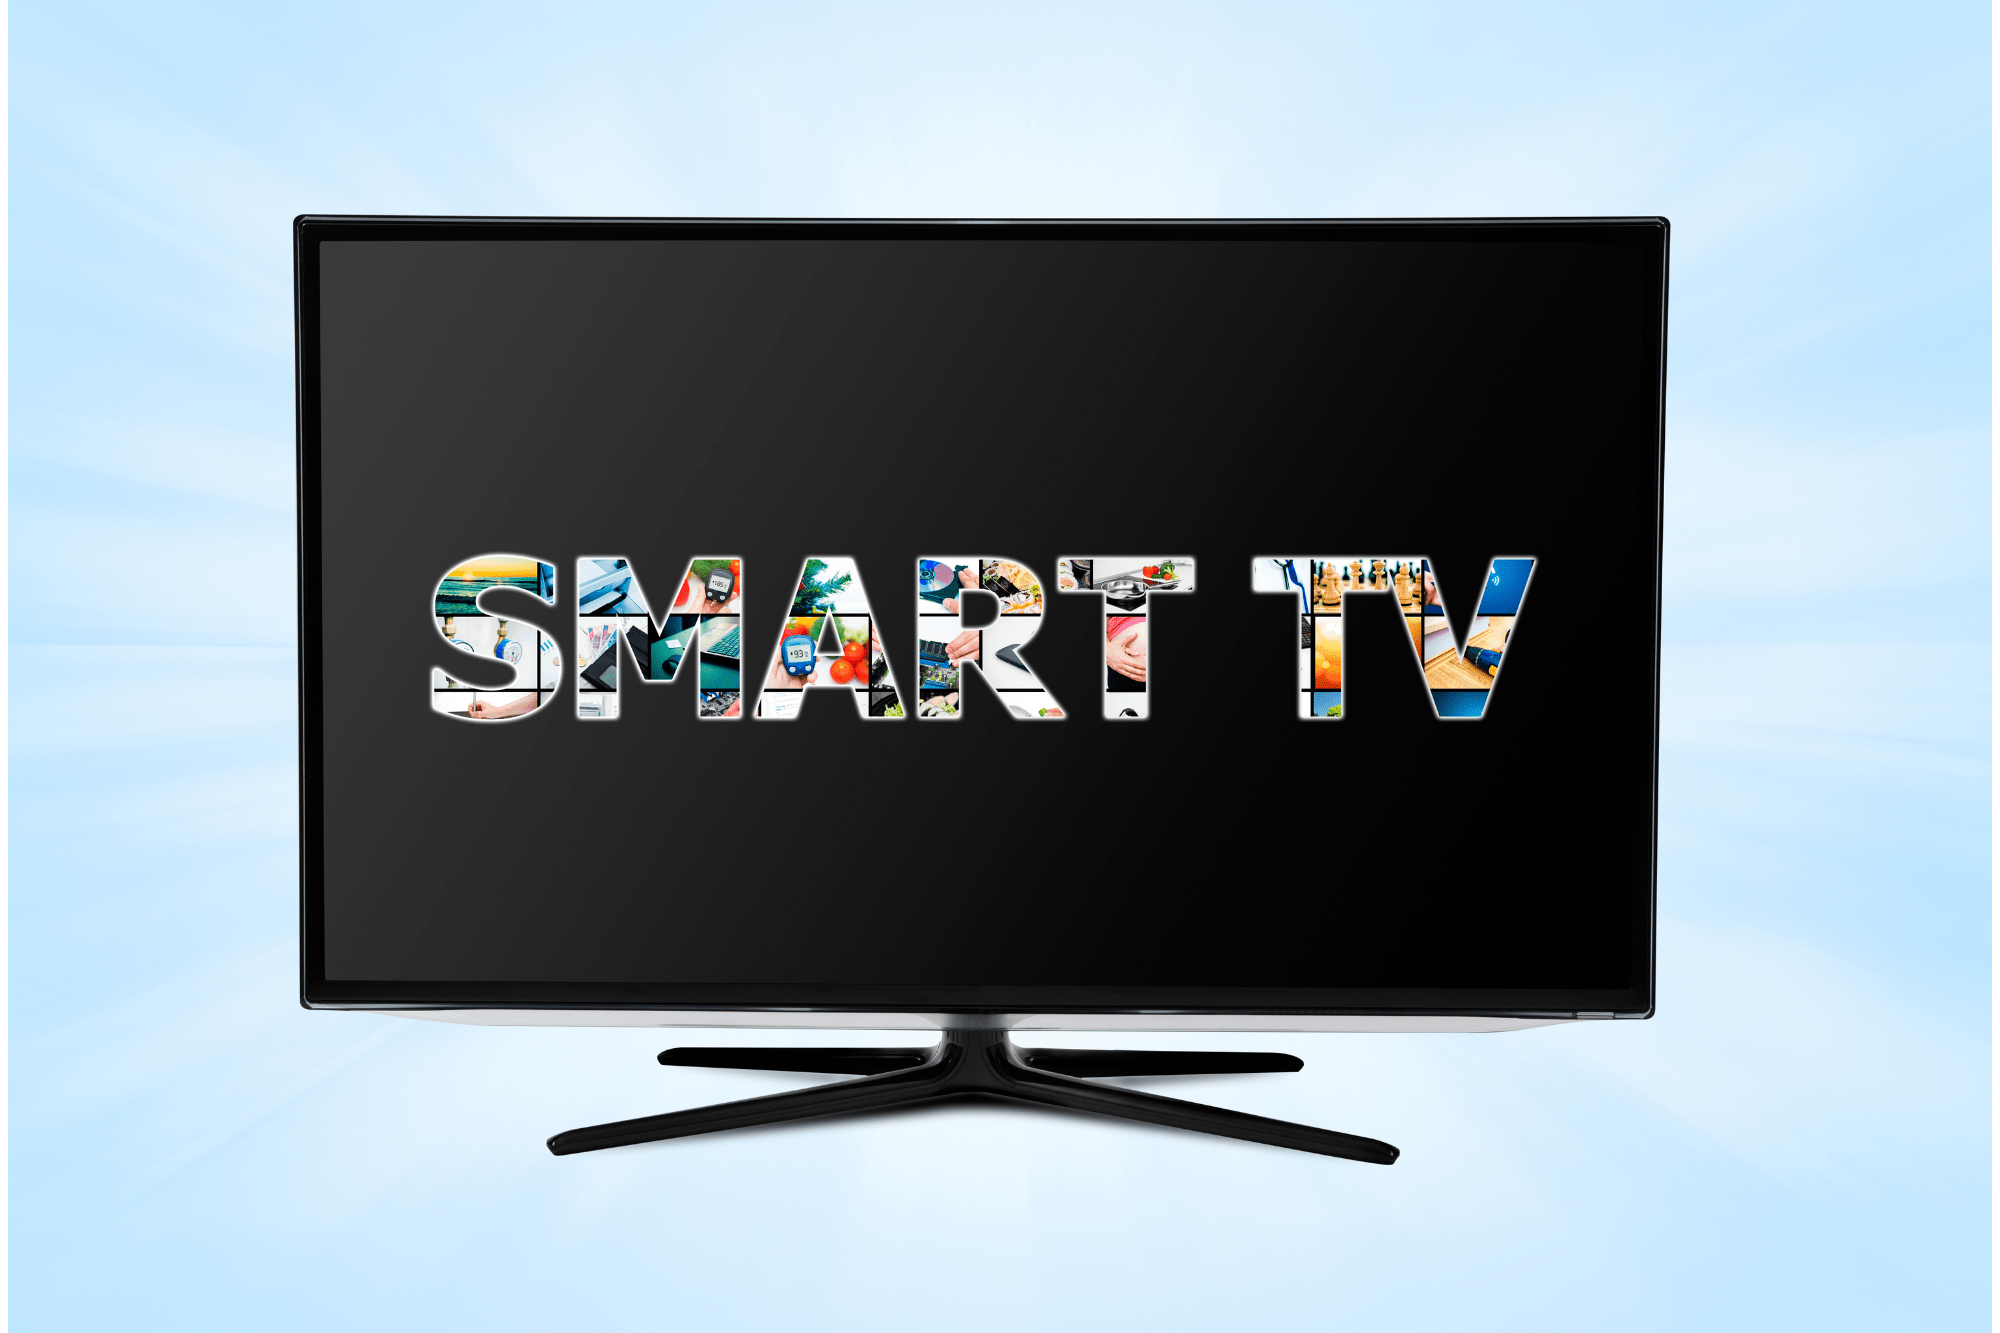 Modern TV with Smart TV words on screen